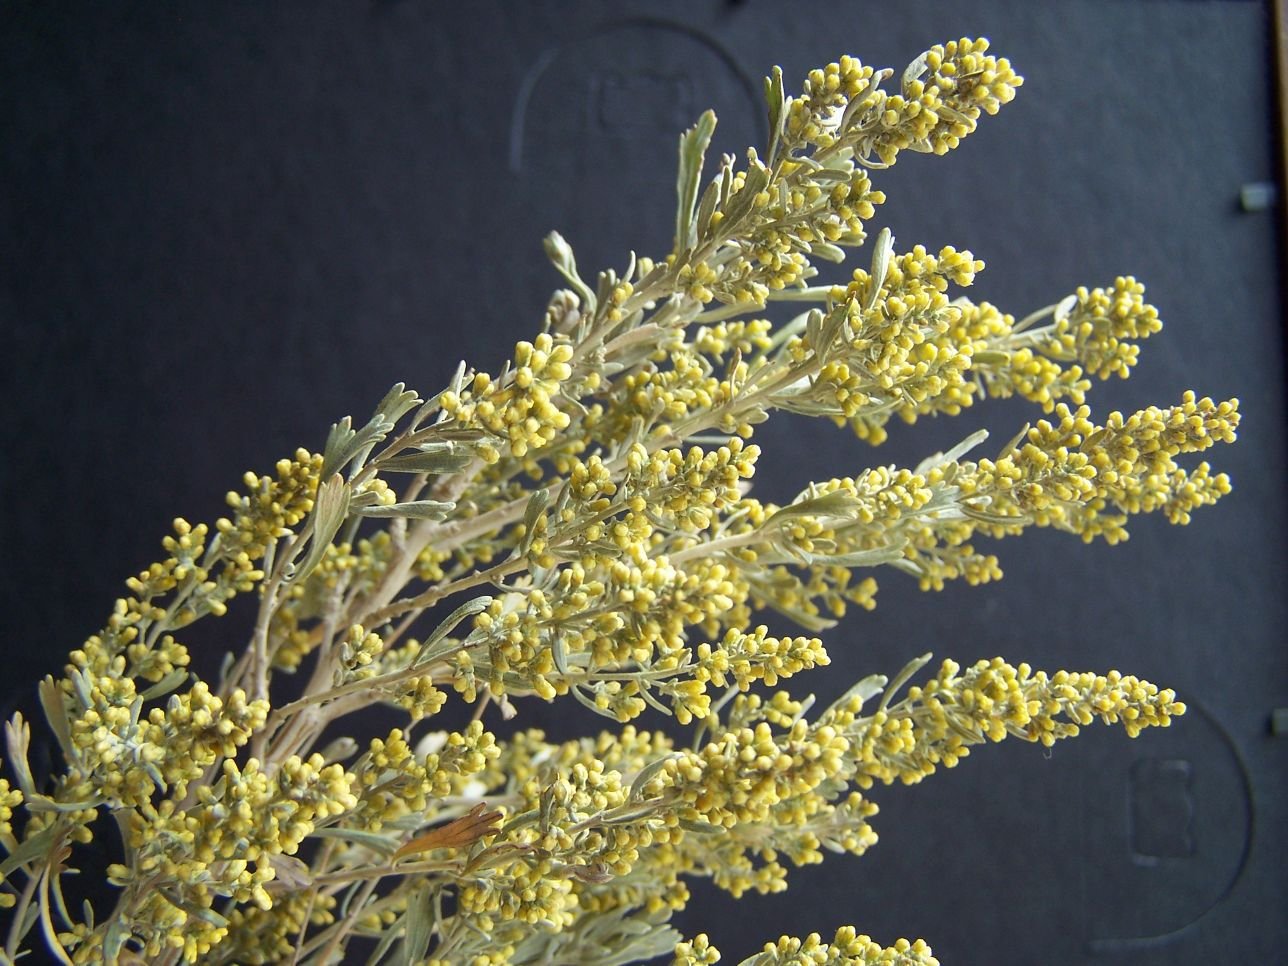 Nature Notes Sagebrush Flowers In Fall Lifestyles Elkodaily Com